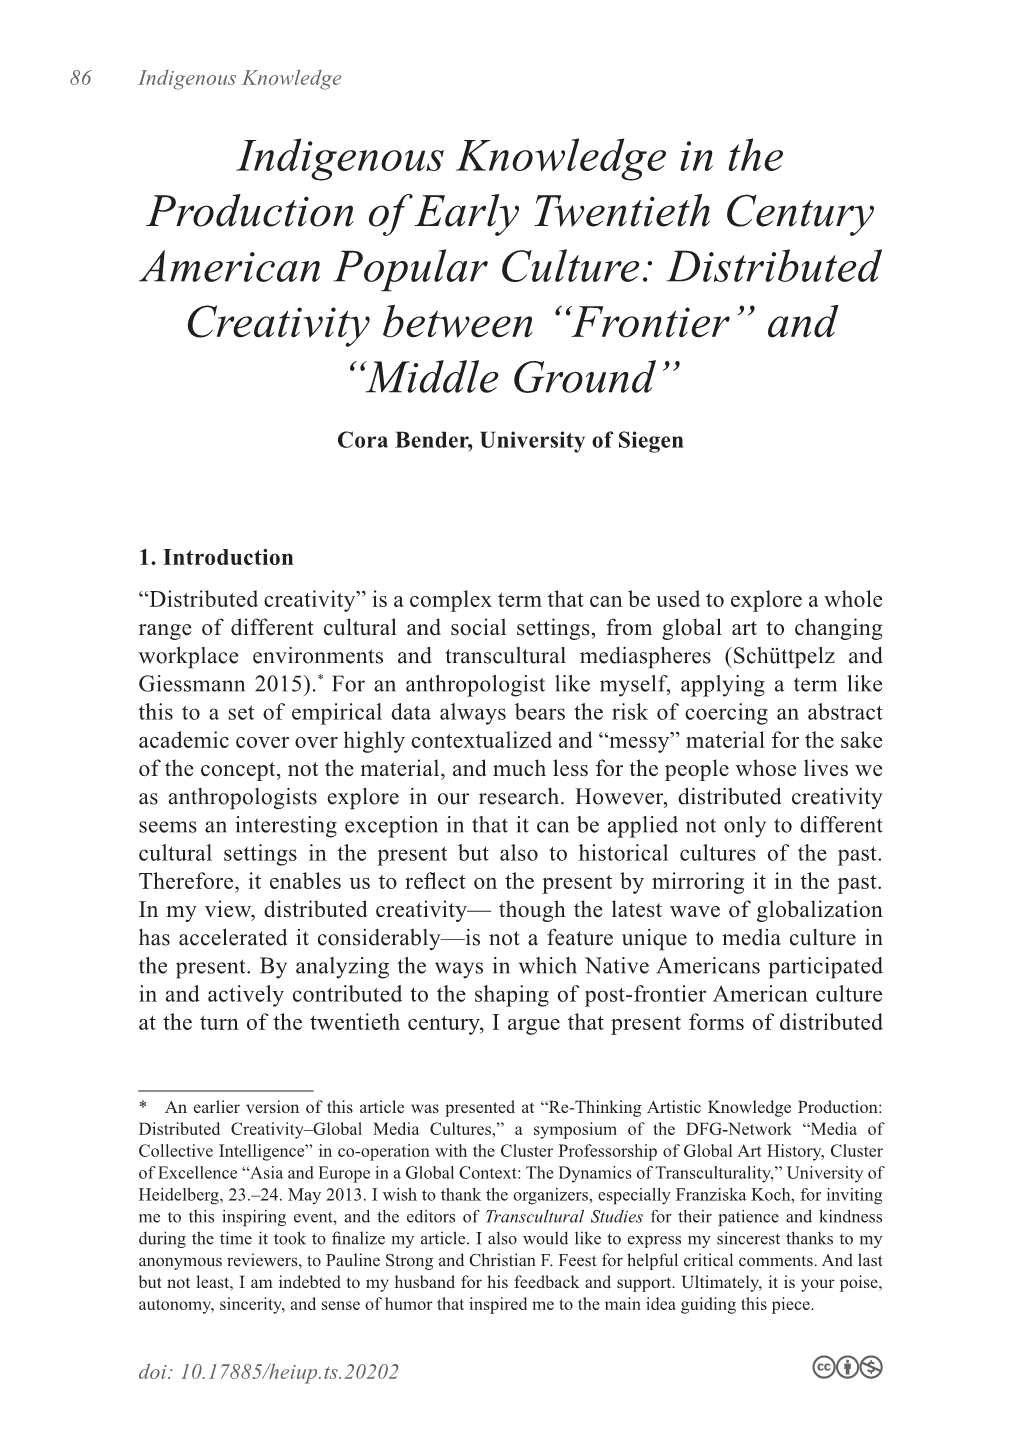 Indigenous Knowledge in the Production of Early Twentieth Century American Popular Culture: Distributed Creativity Between “Frontier” and “Middle Ground”